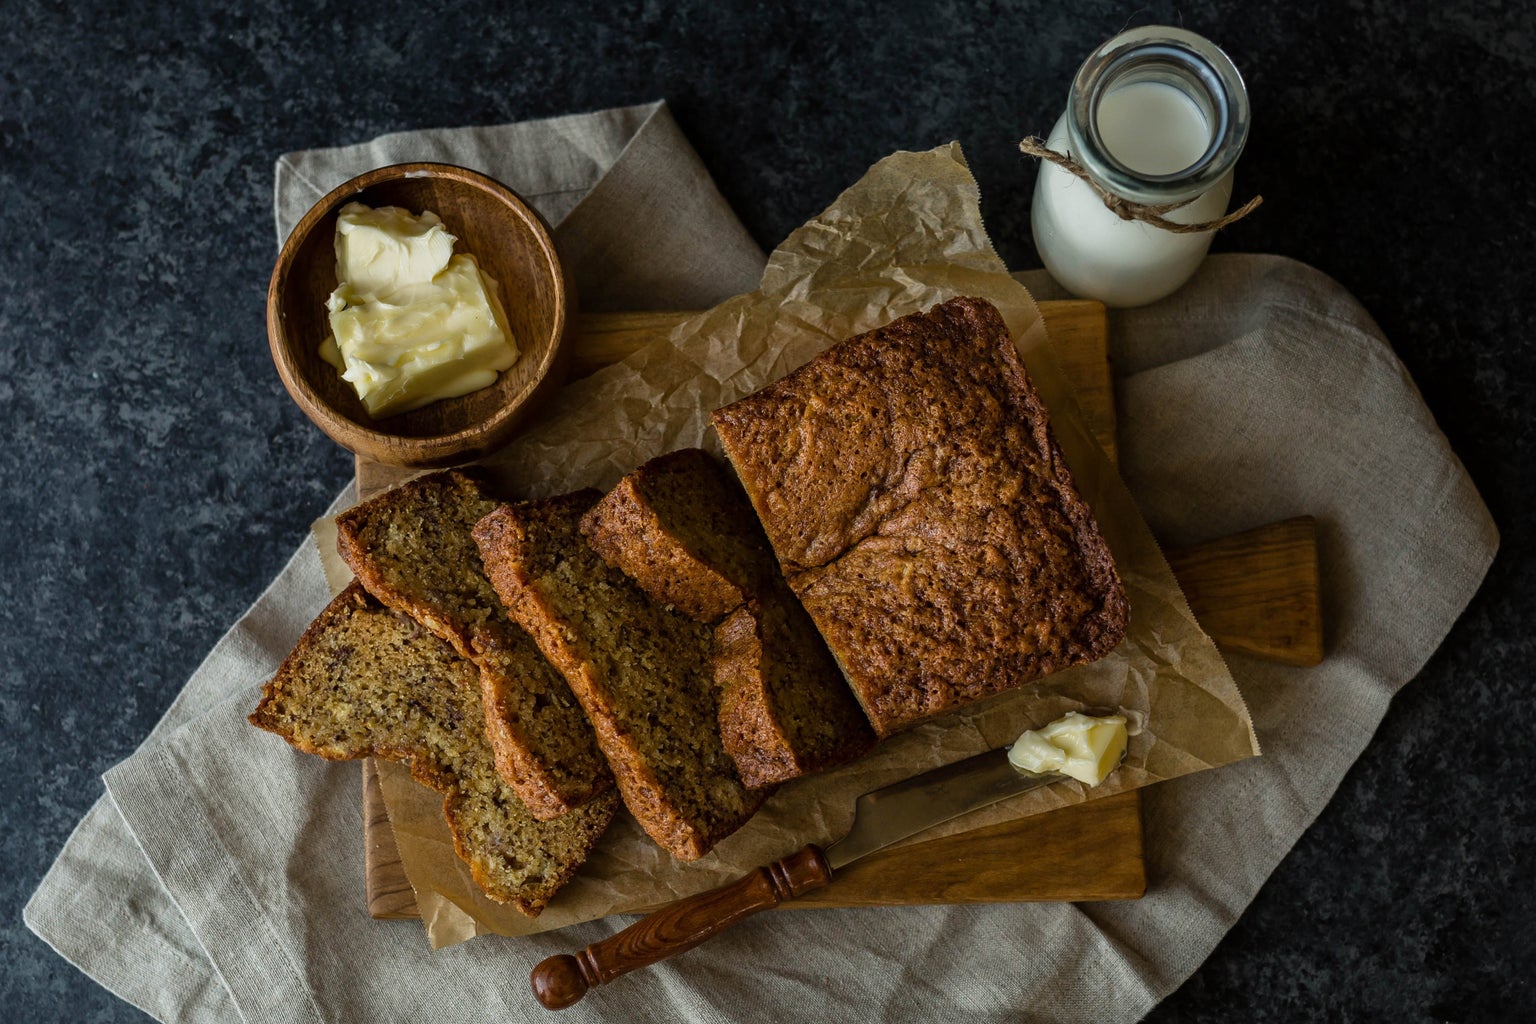 banana bread with butter and milk on the side